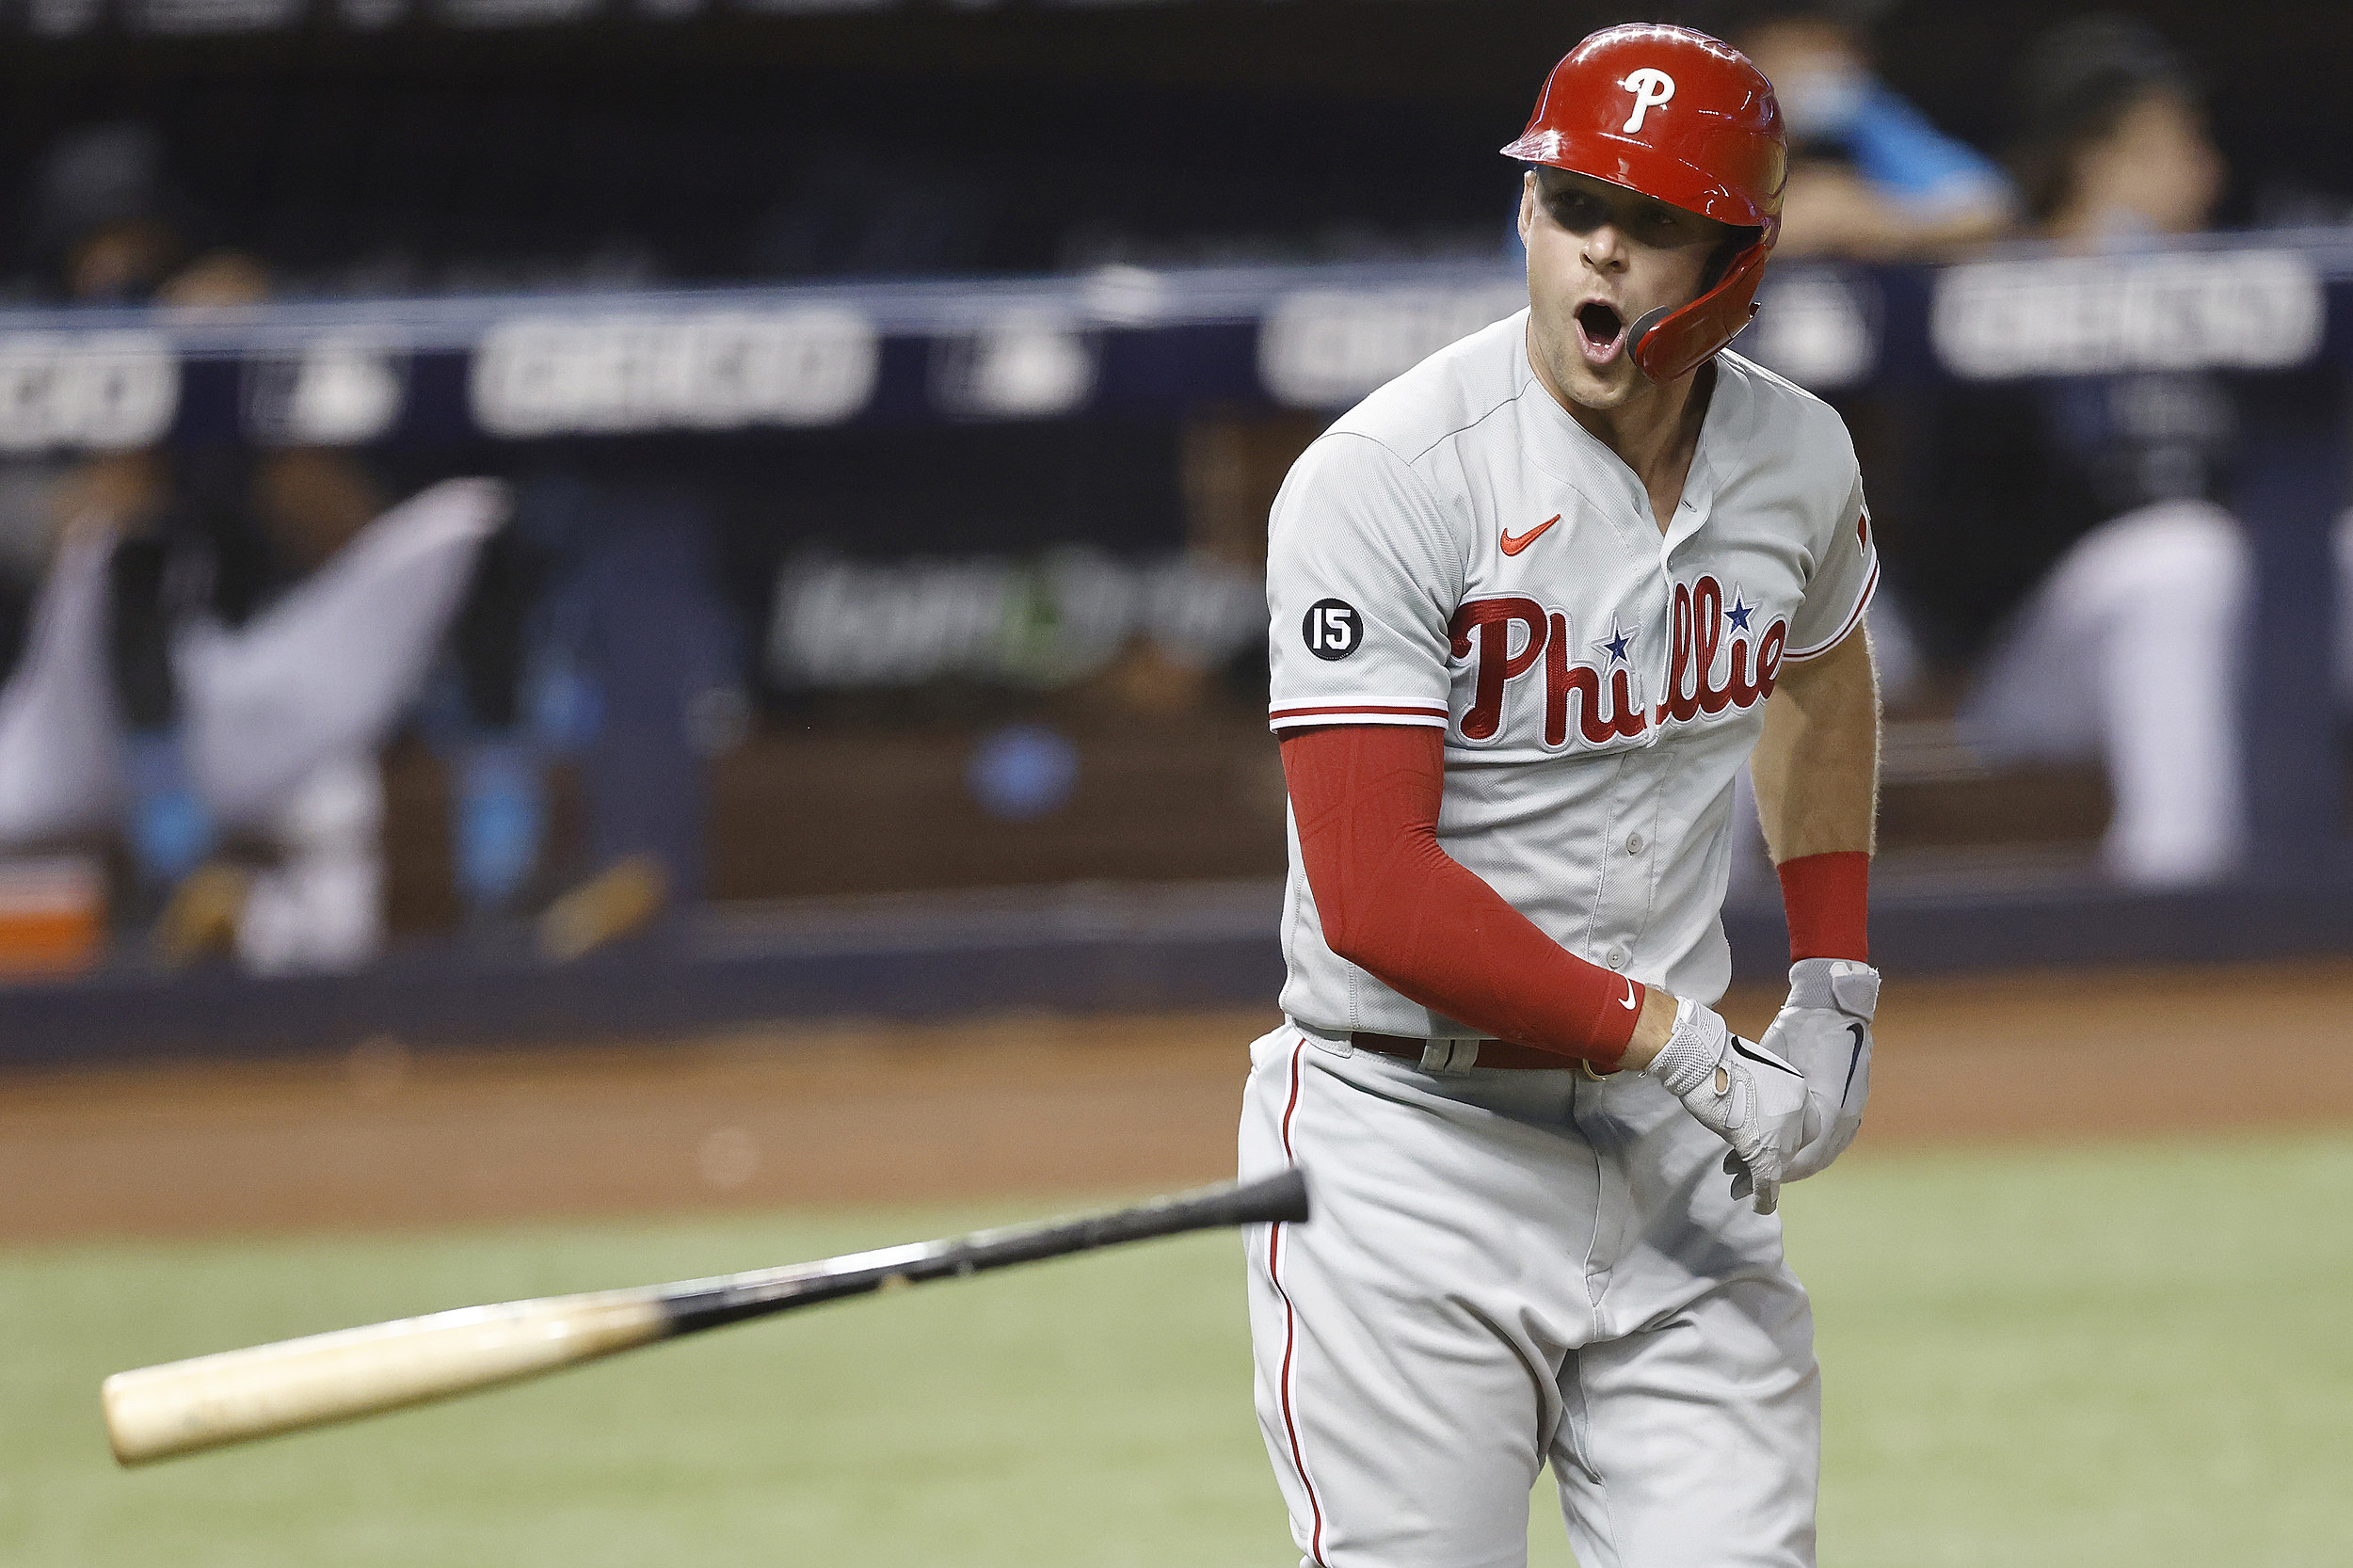 How an improving Rhys Hoskins has established himself as one of MLB's most  dangerous hitters - The Athletic